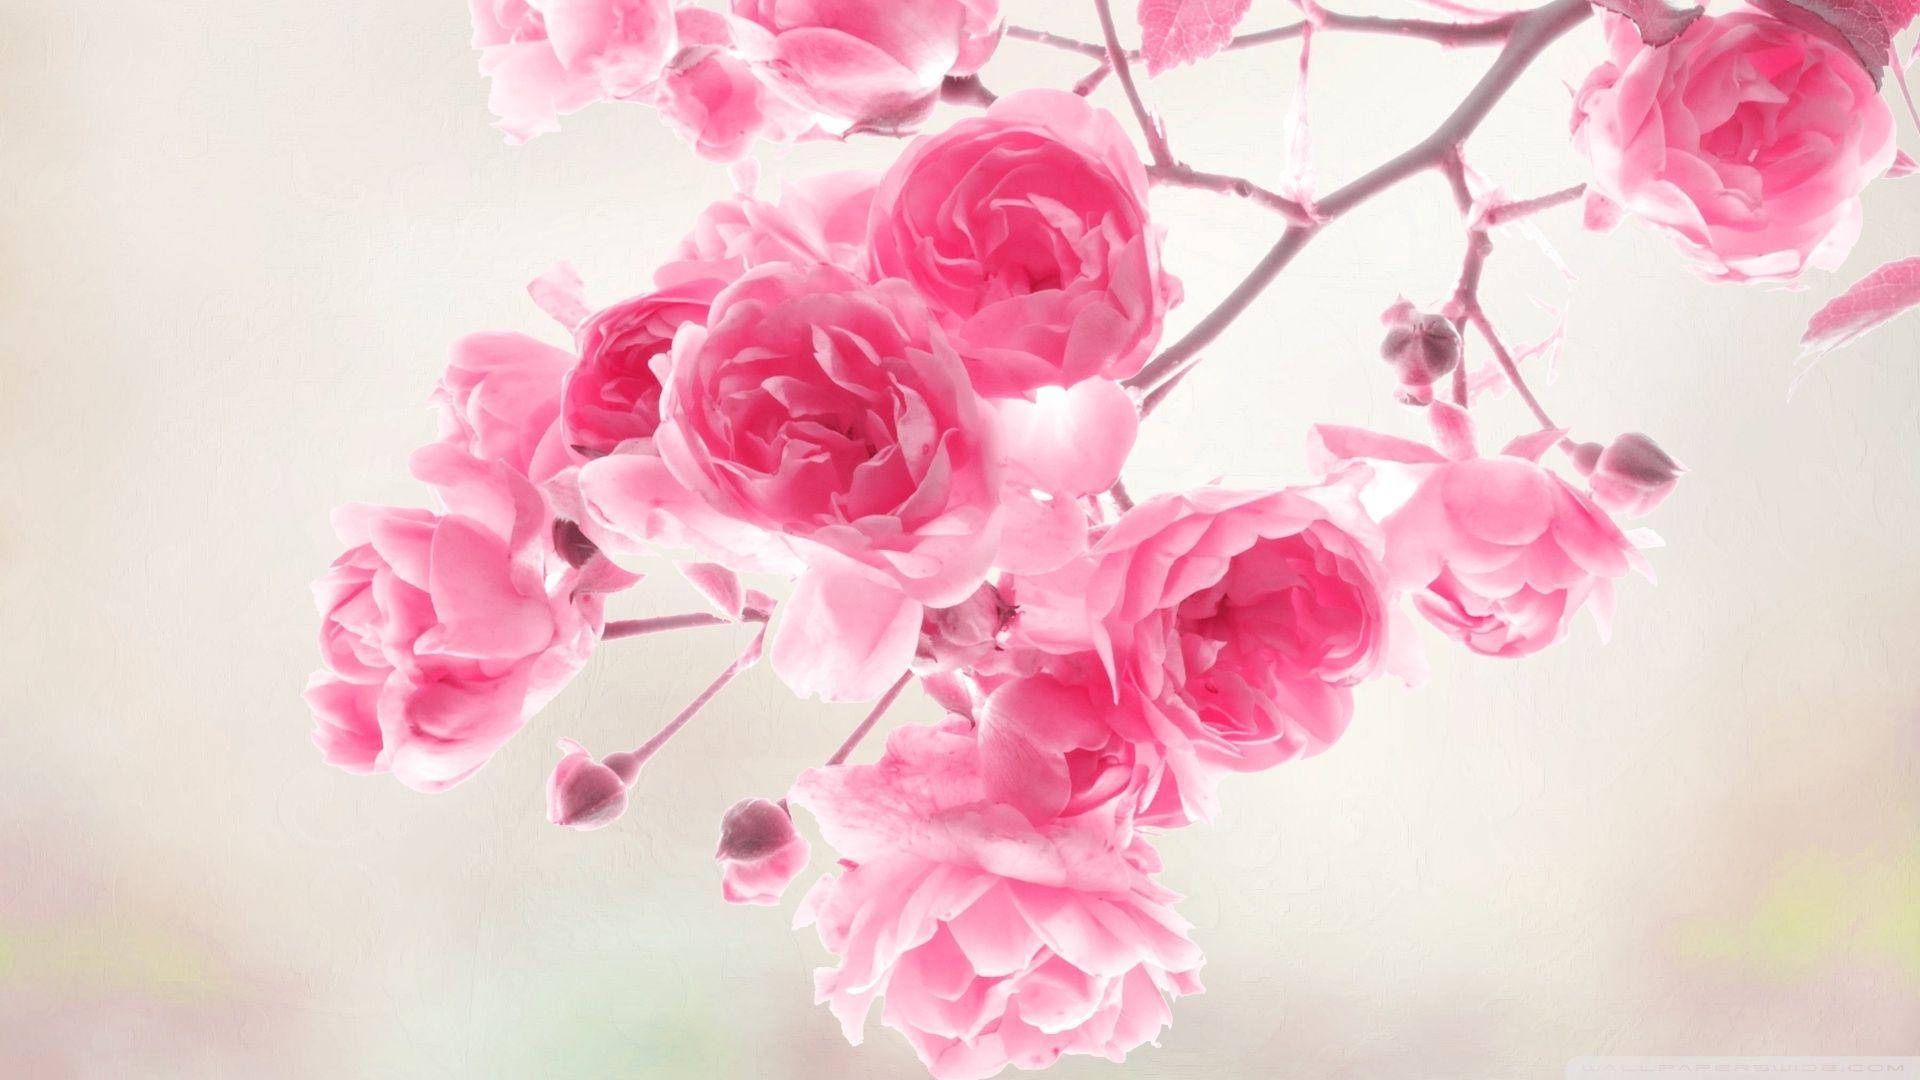 Vintage Flower Pink Background. Top Picture Gallery Online